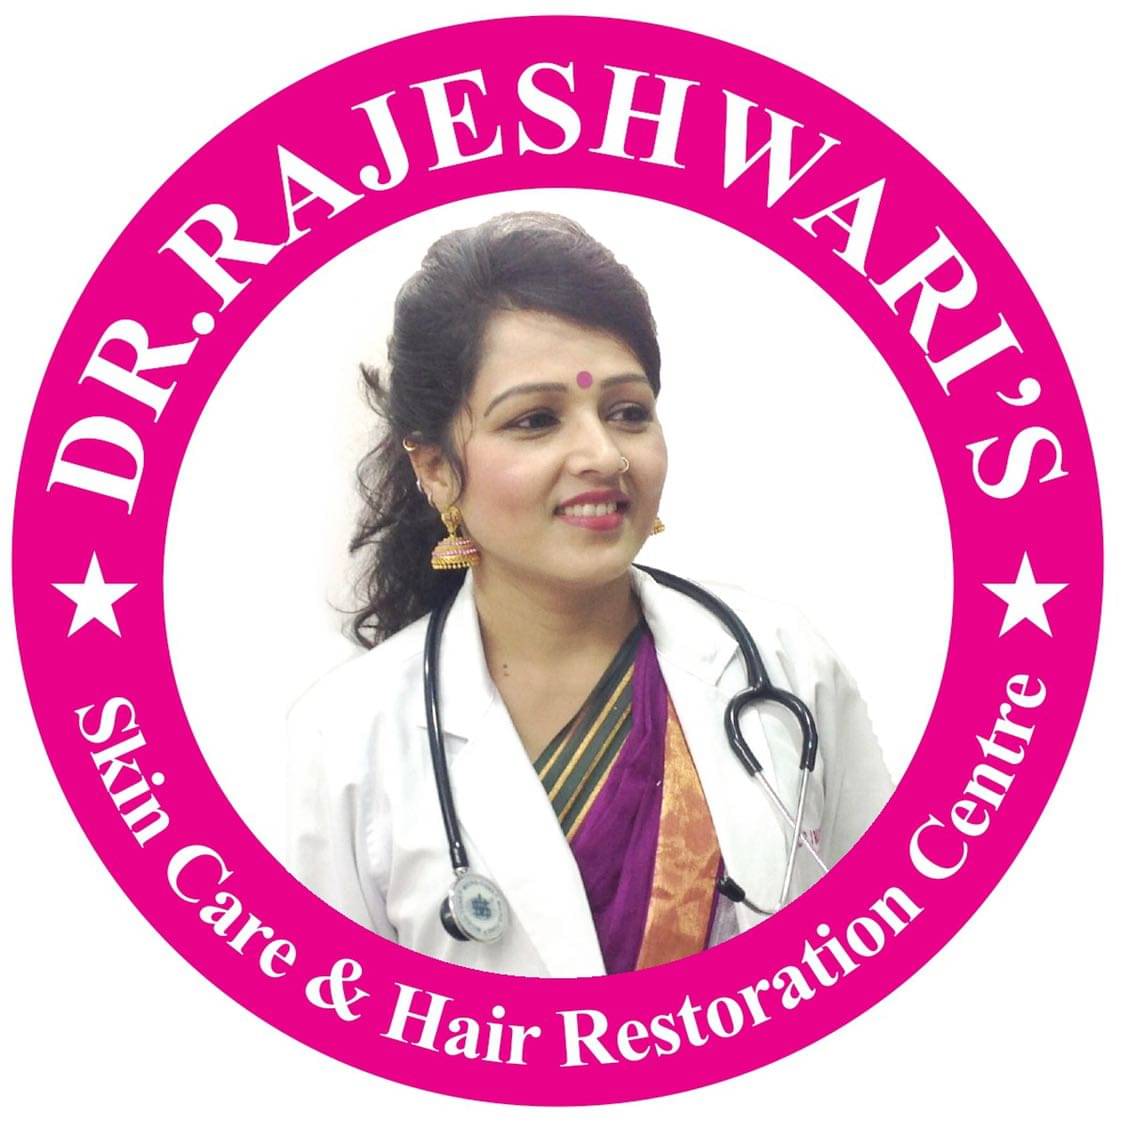 Perfect Skin Clinic in Amritsar - Book Appointment, View Contact Number,  Feedbacks, Address | Dr. Swati Arora